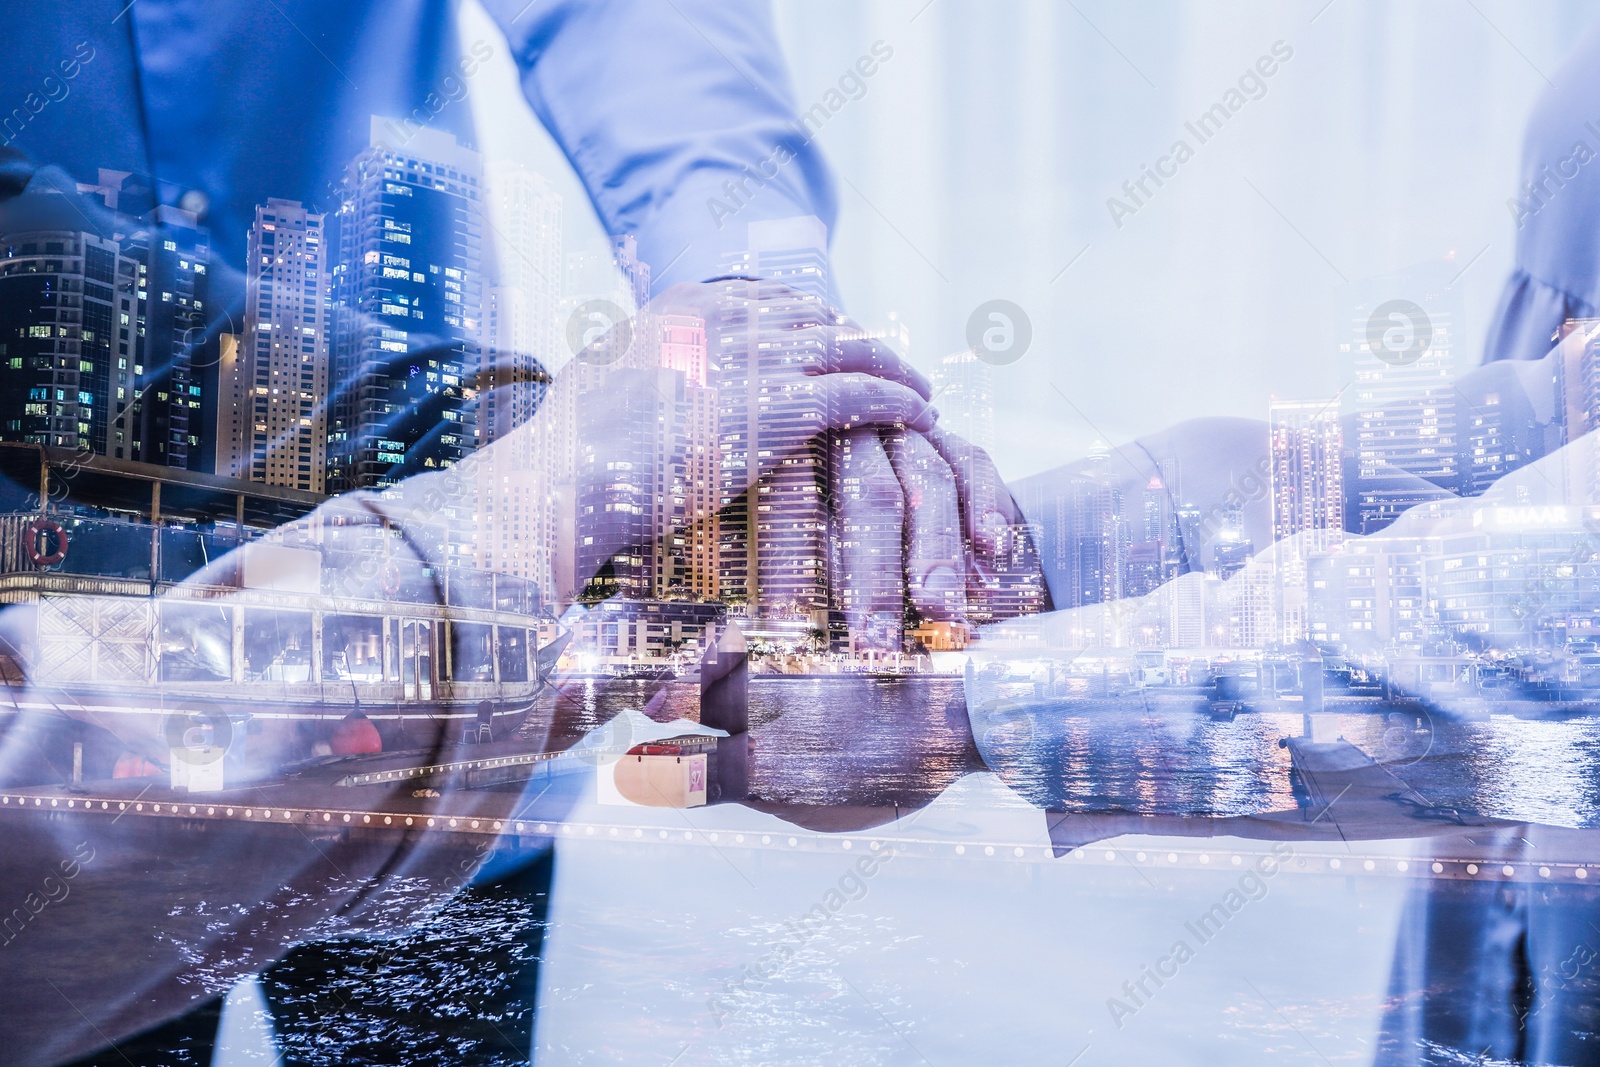 Image of Partnership, cooperation, collaboration. Double exposure of night cityscape and people joining hands